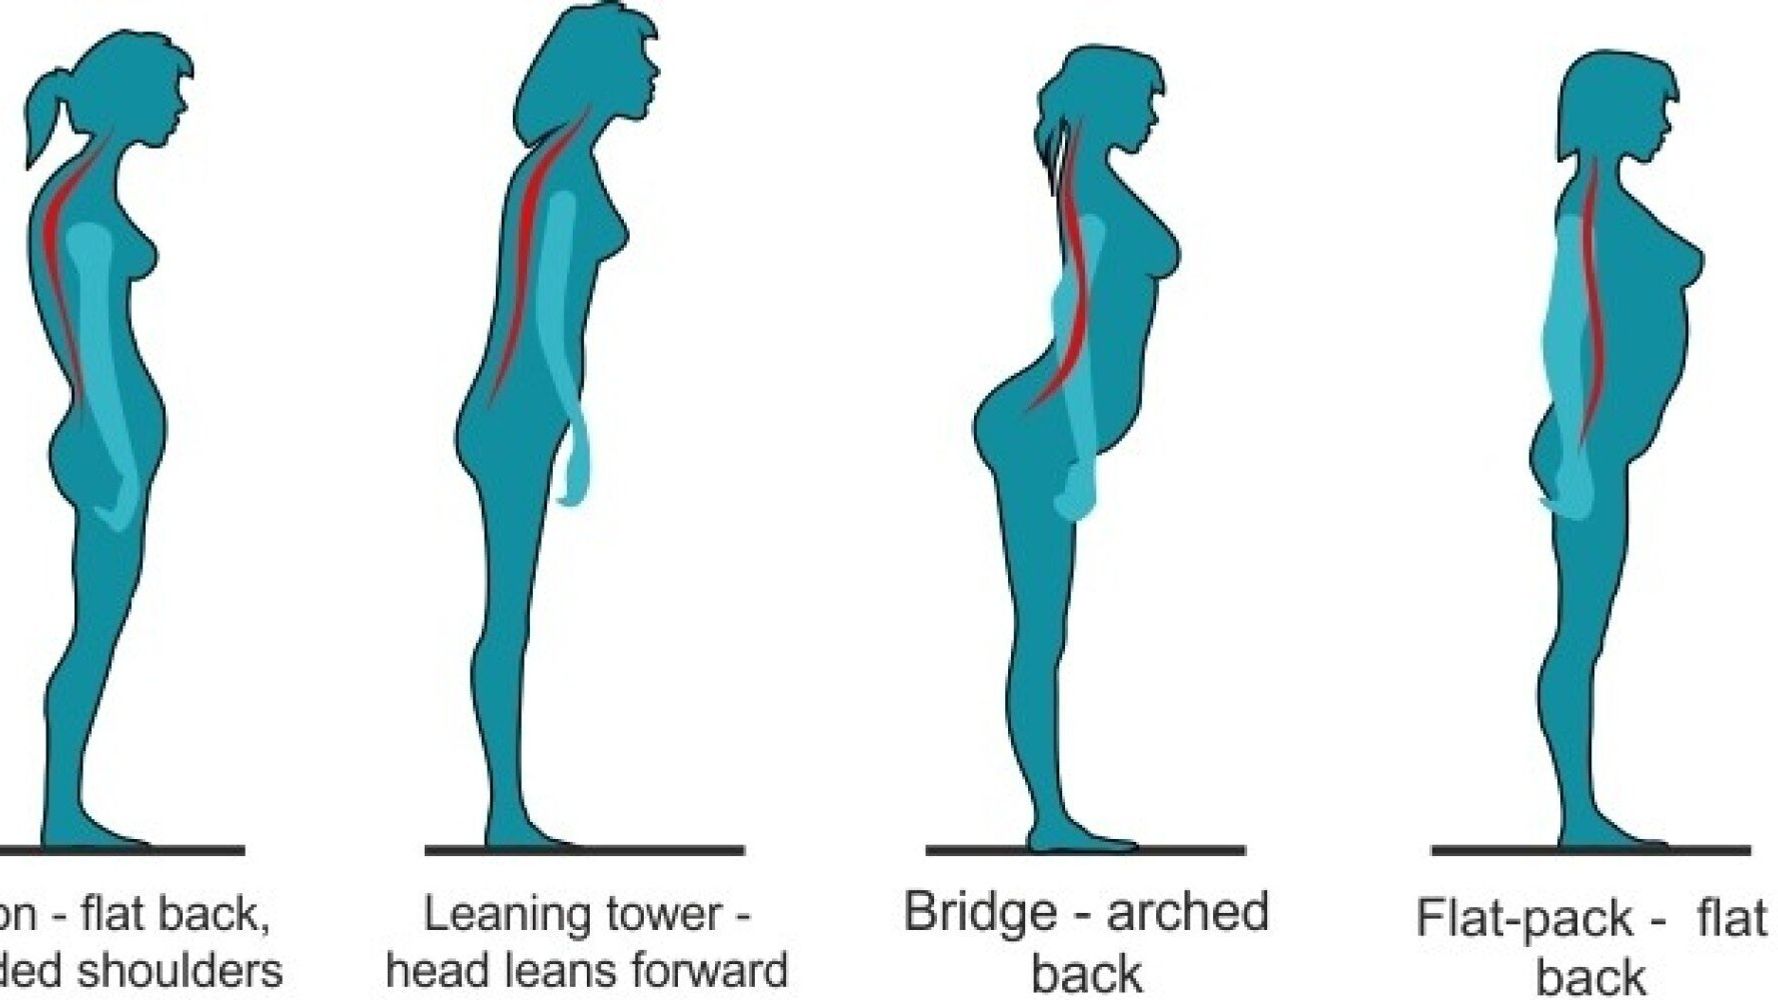 Graphic Reveals The Worst Posture For Back Pain.